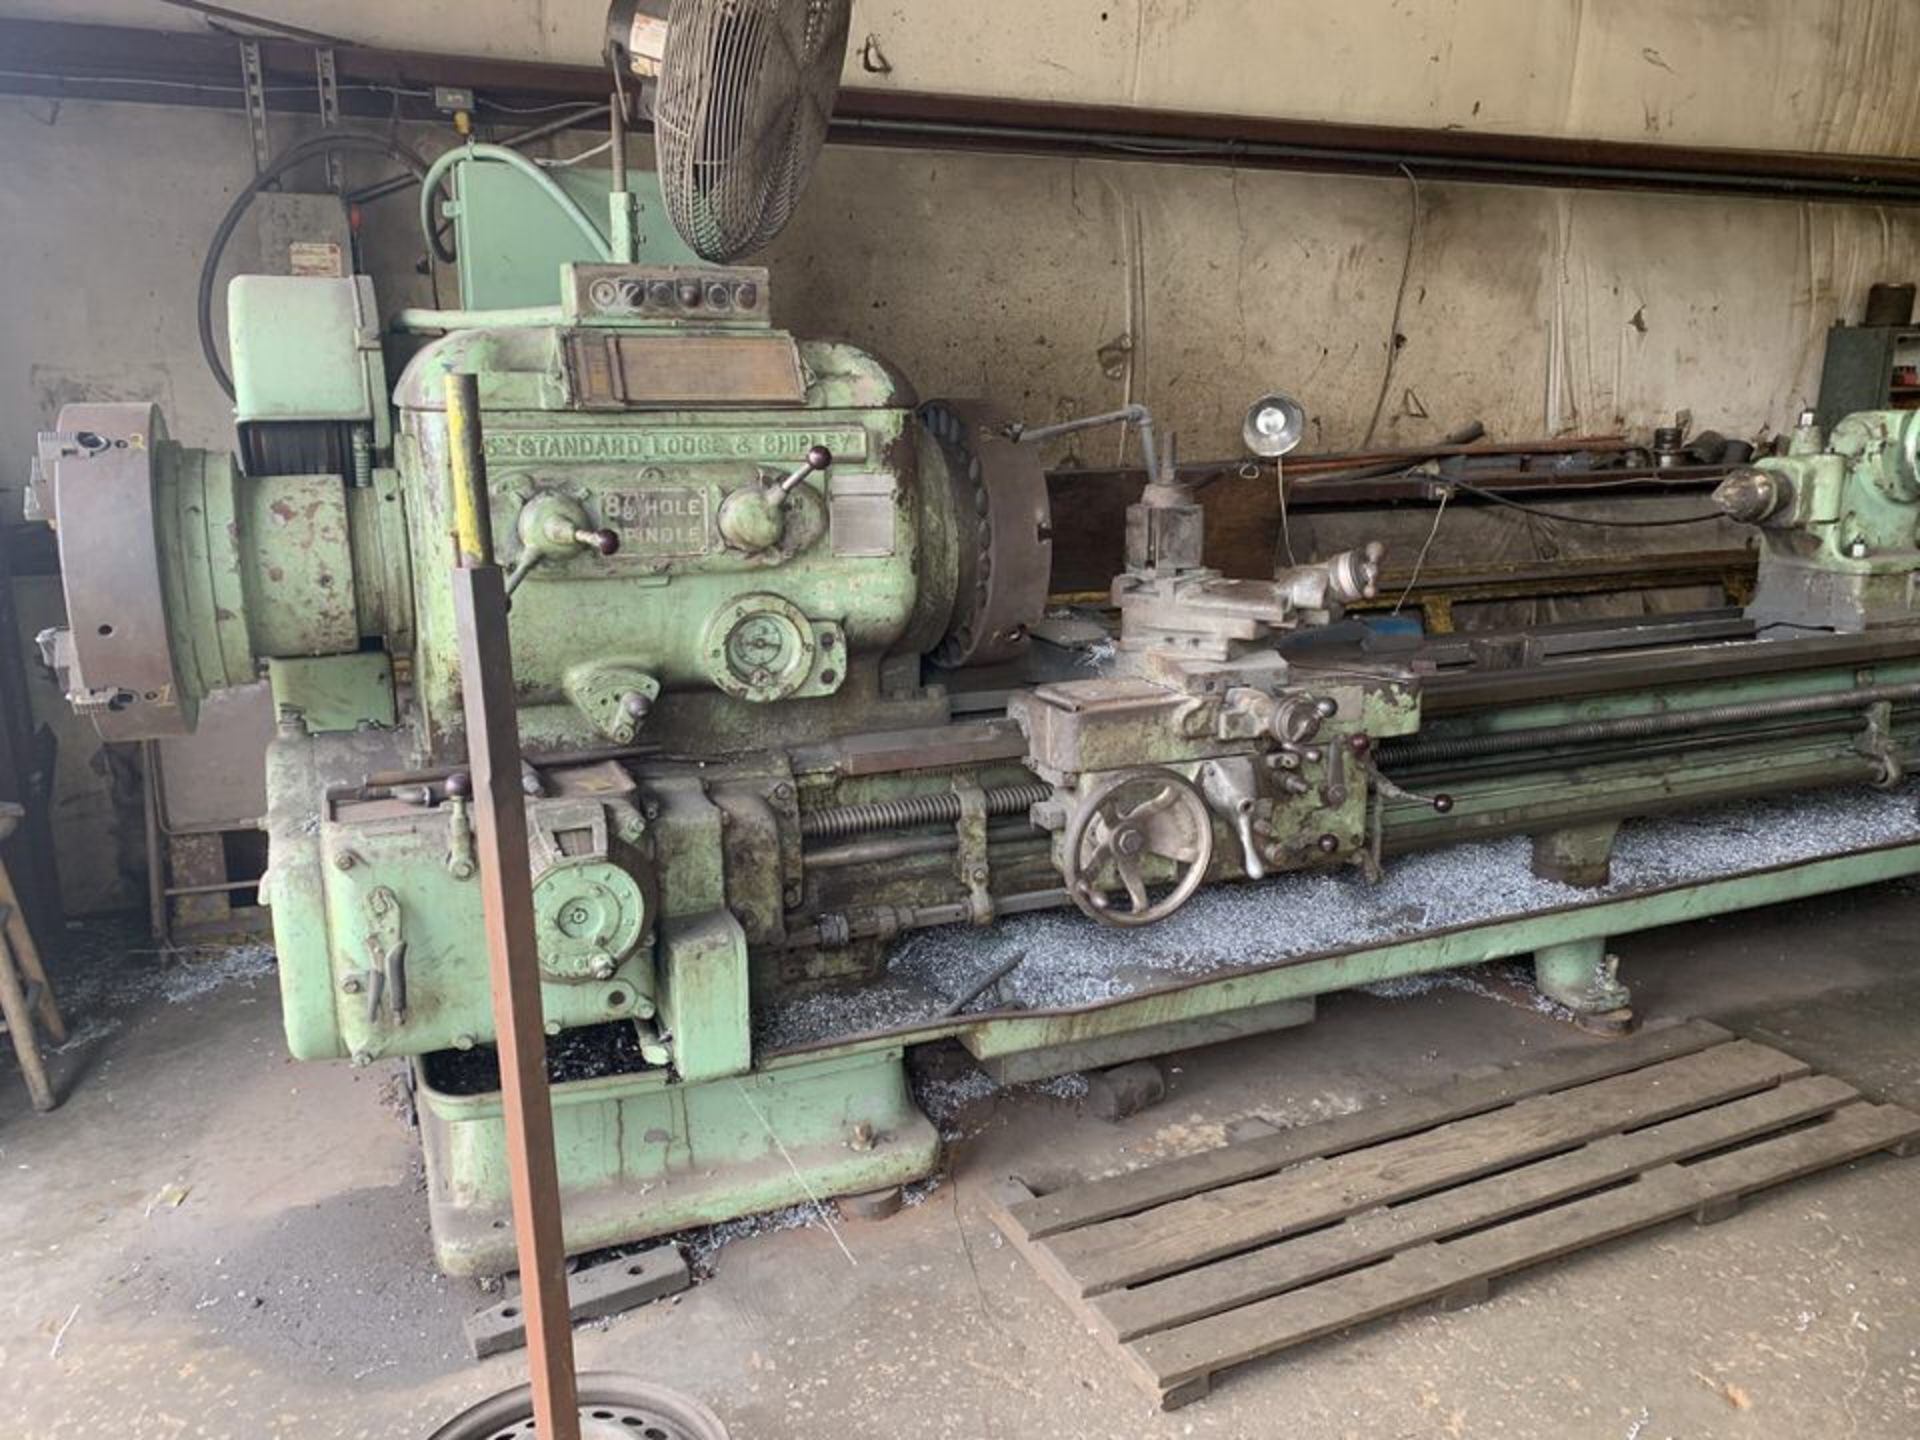 Lodge & Shipley 25" Standard Engine Lathe, 24" swing, 144" bed length, 21" 4-jaw front and rear